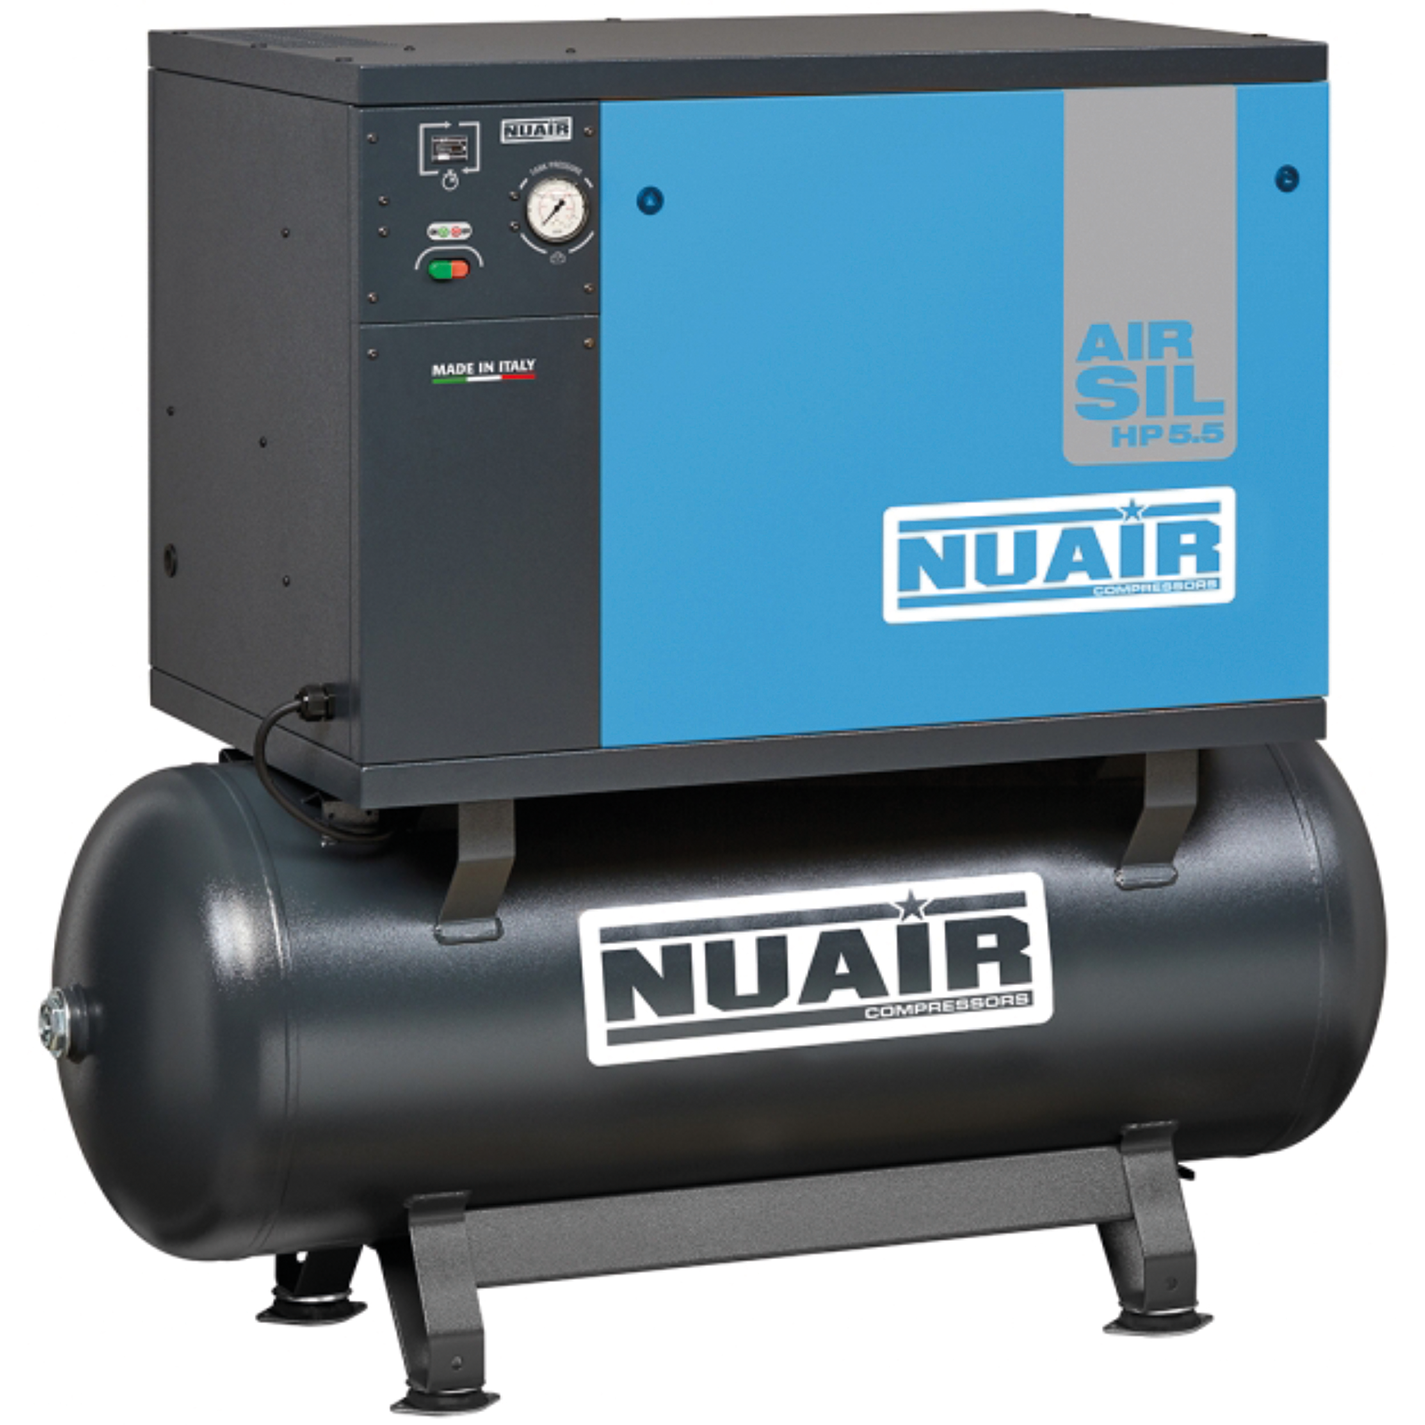 UK's Leading Suppliers of High Quality Piston Compressors